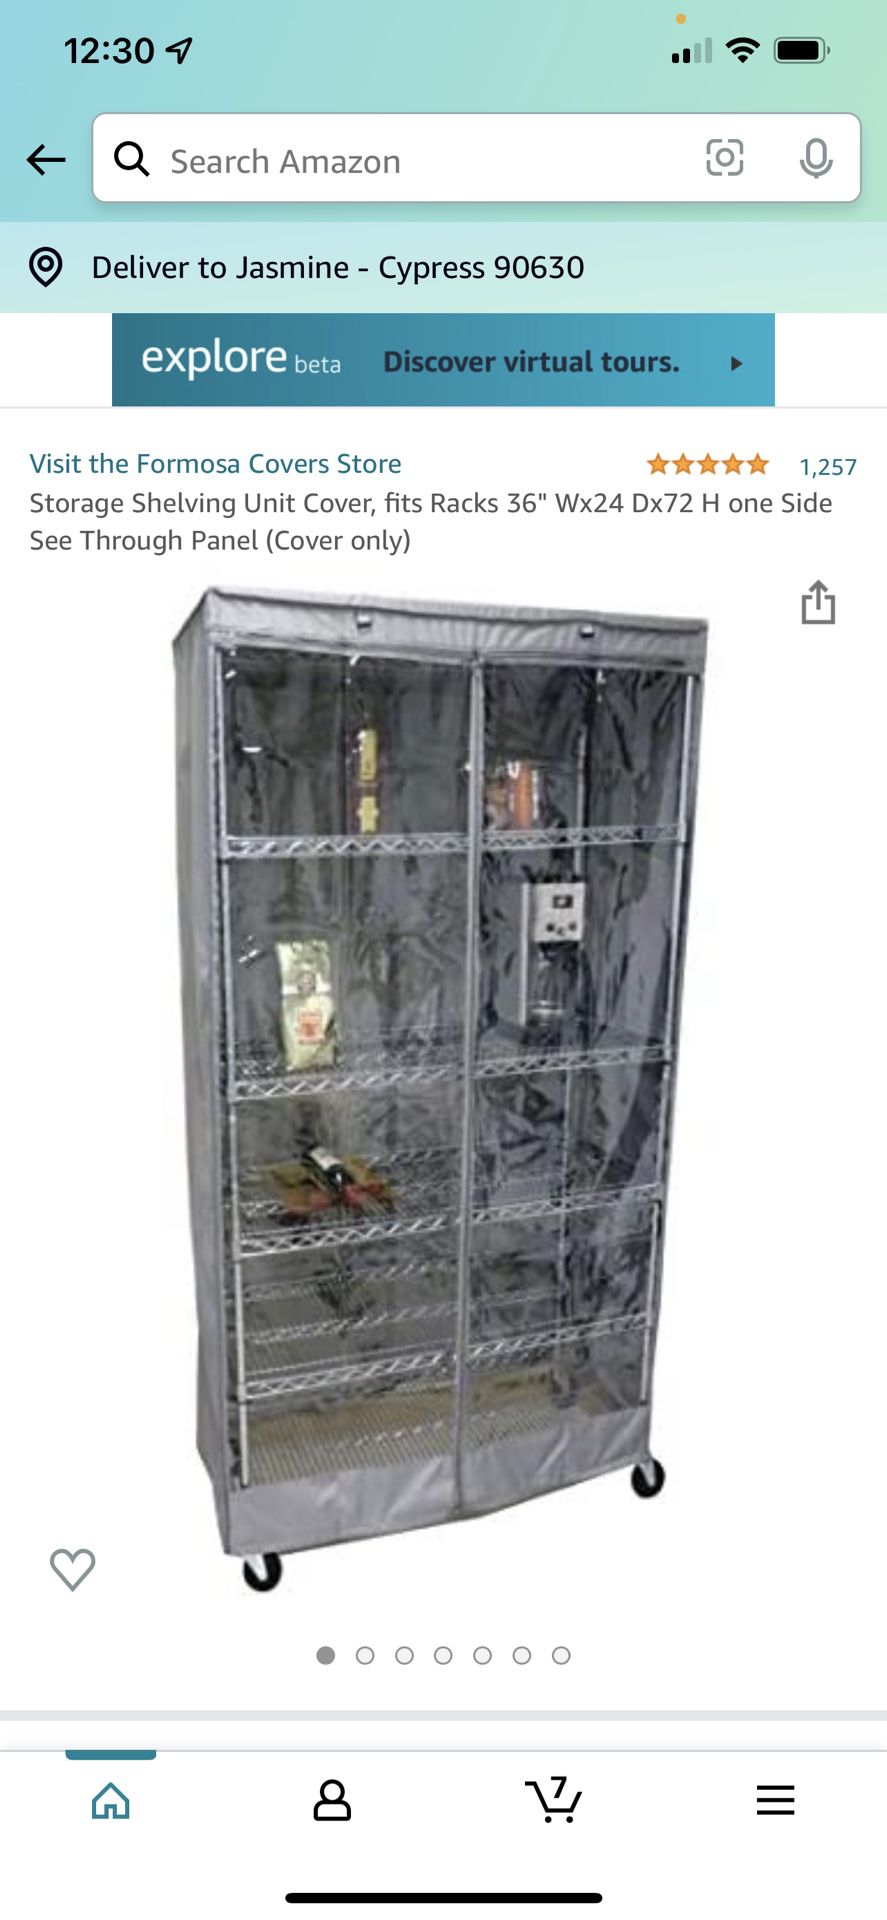 Waterproof Shelving Cover (for Garage or outdoor)